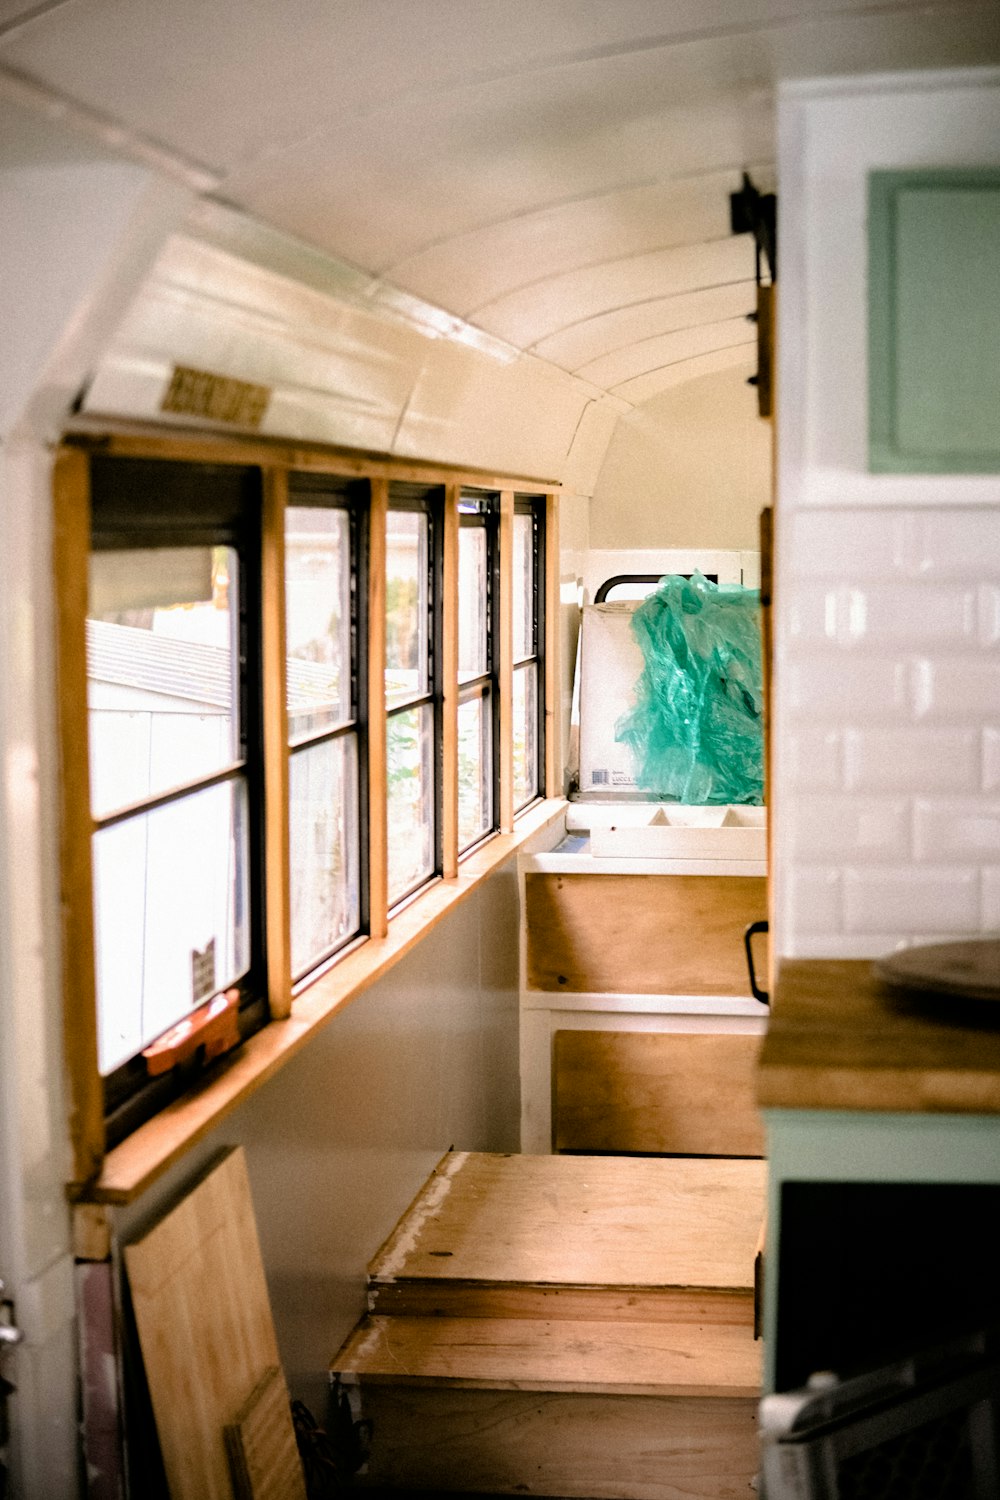 a view of a kitchen and stairs from inside a bus